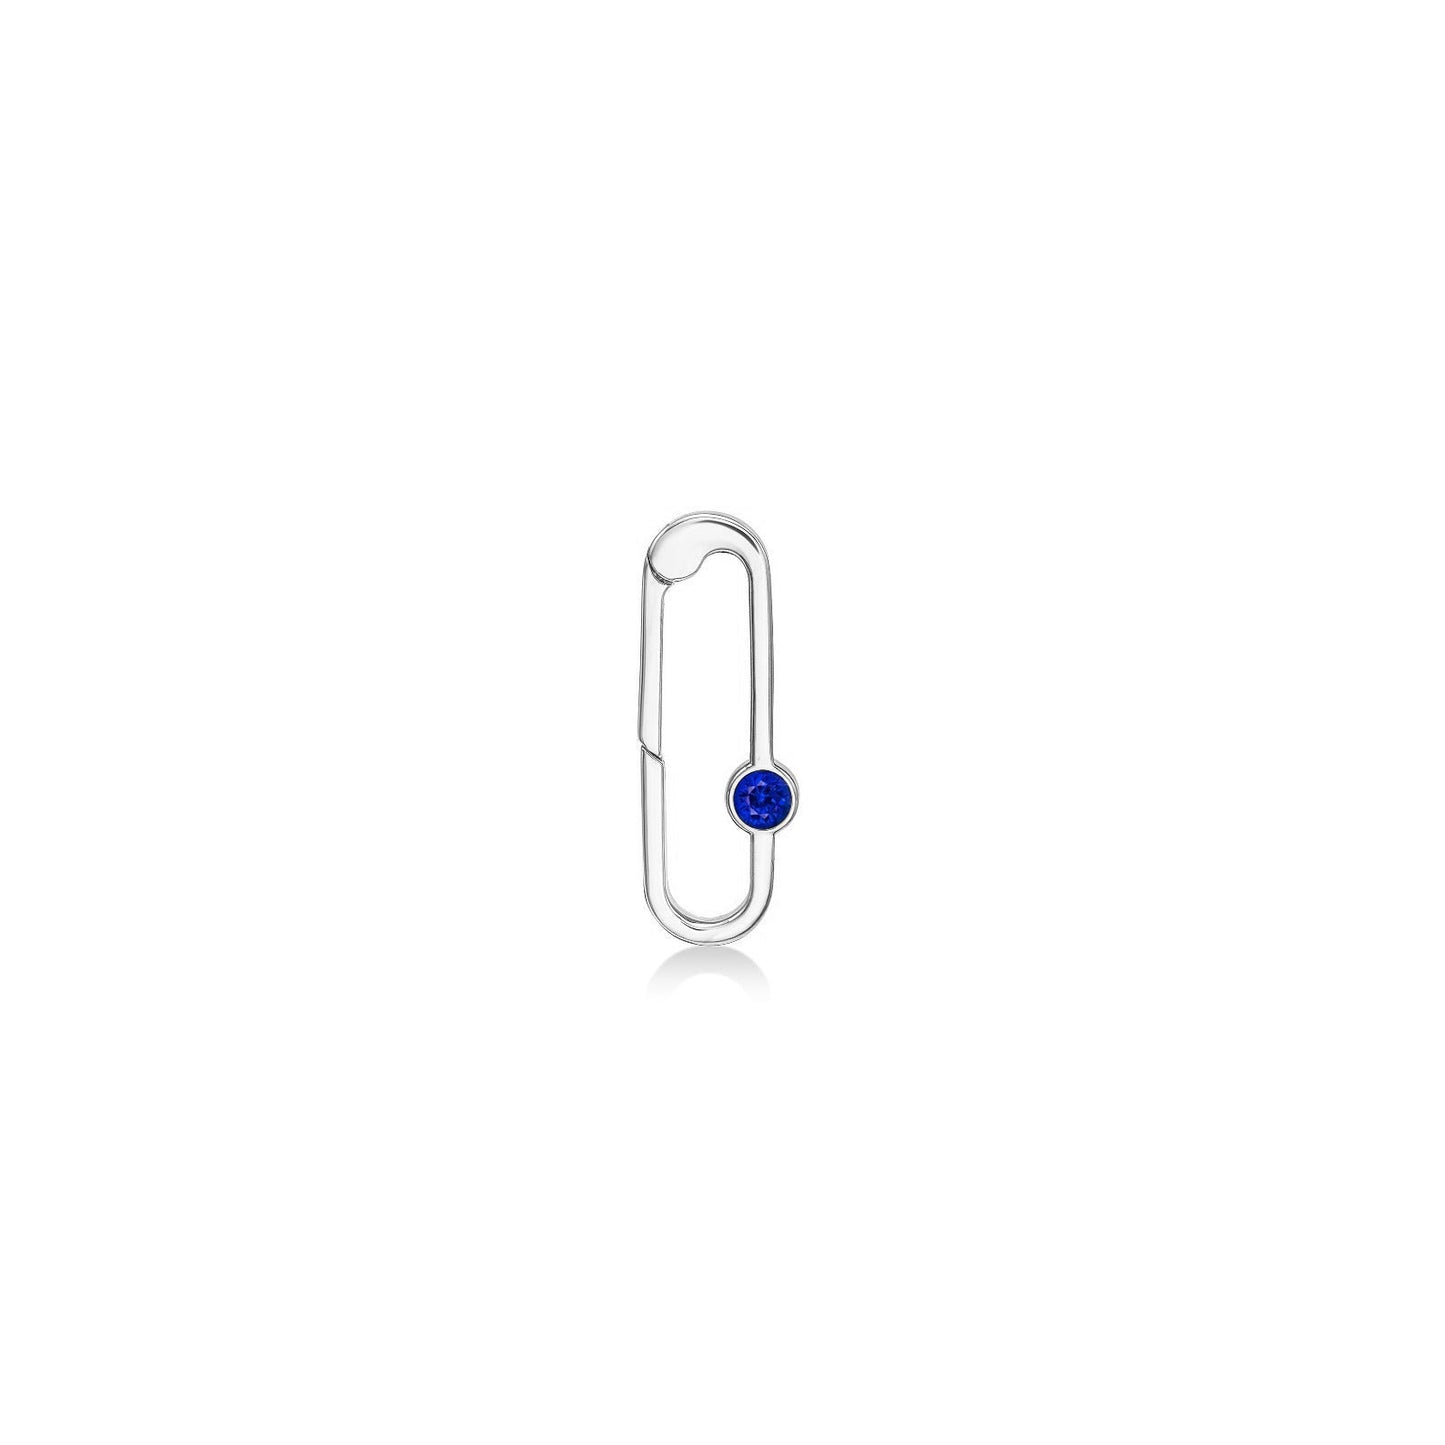 14k white gold paperclip charm lock with sapphire